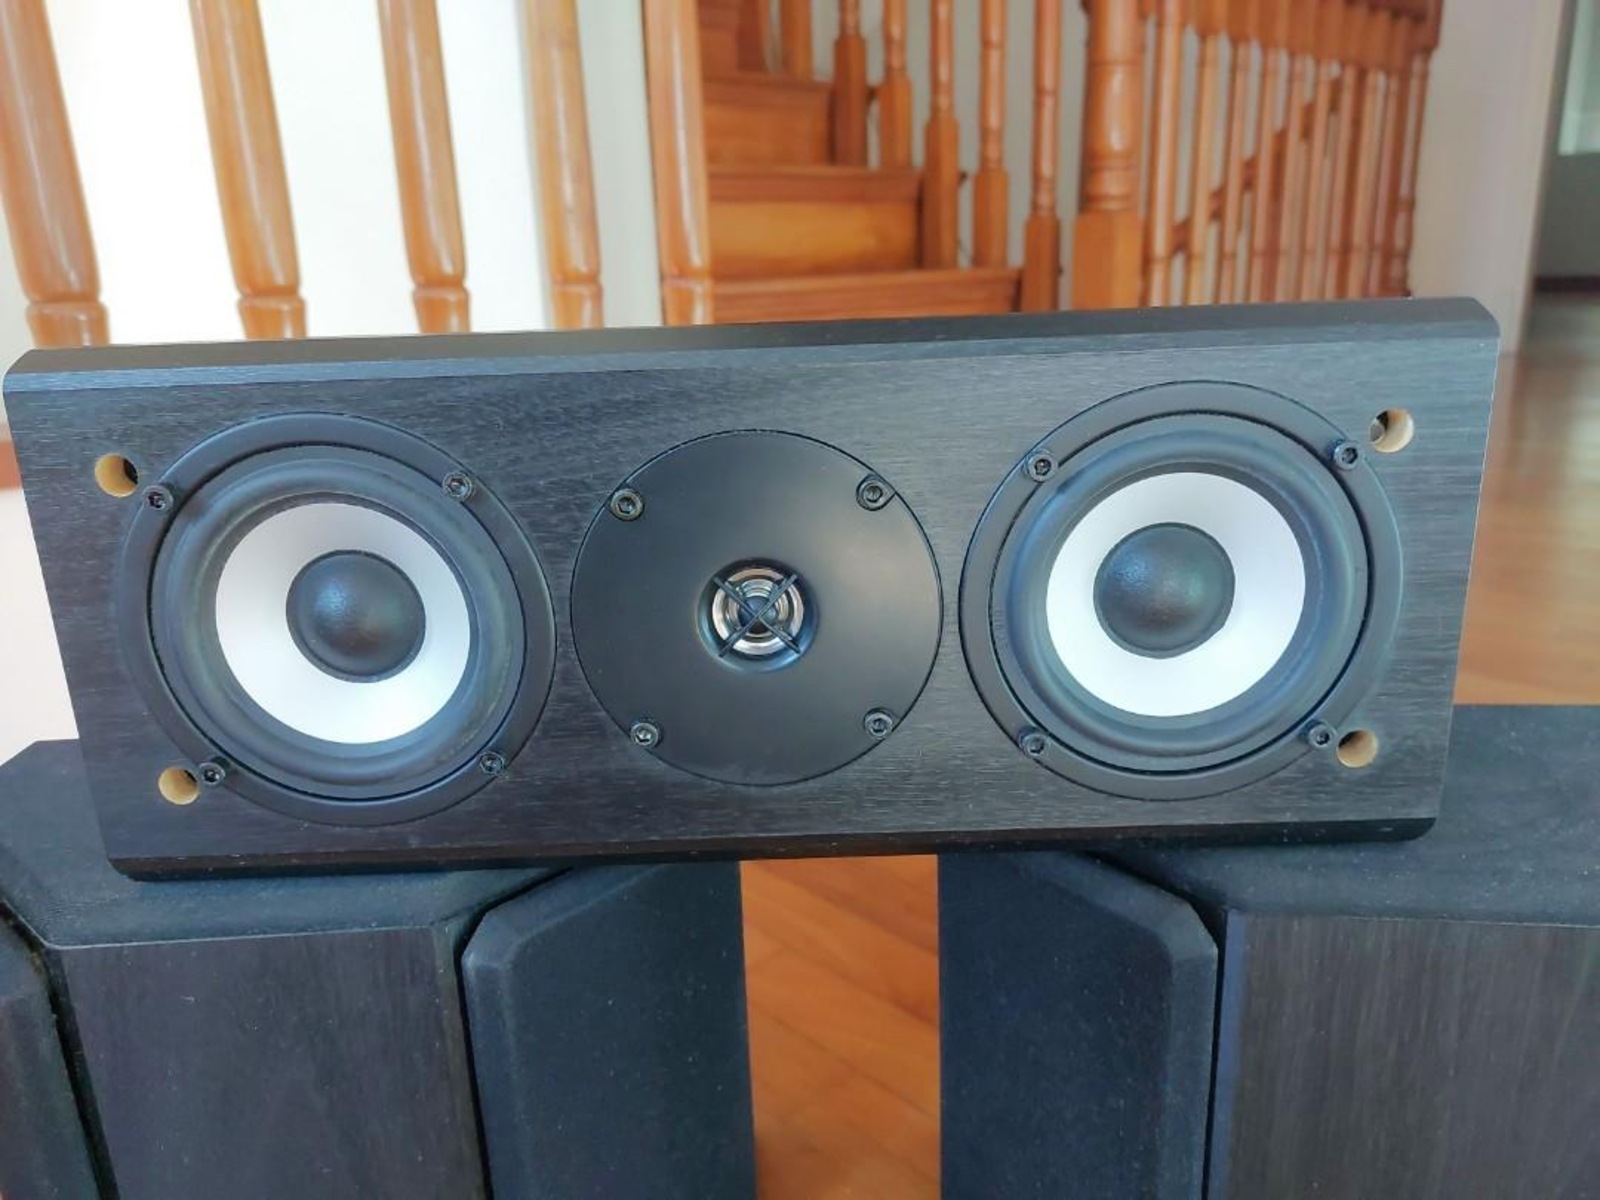 How To Wire Speakers Appropriately For A Surround Sound System